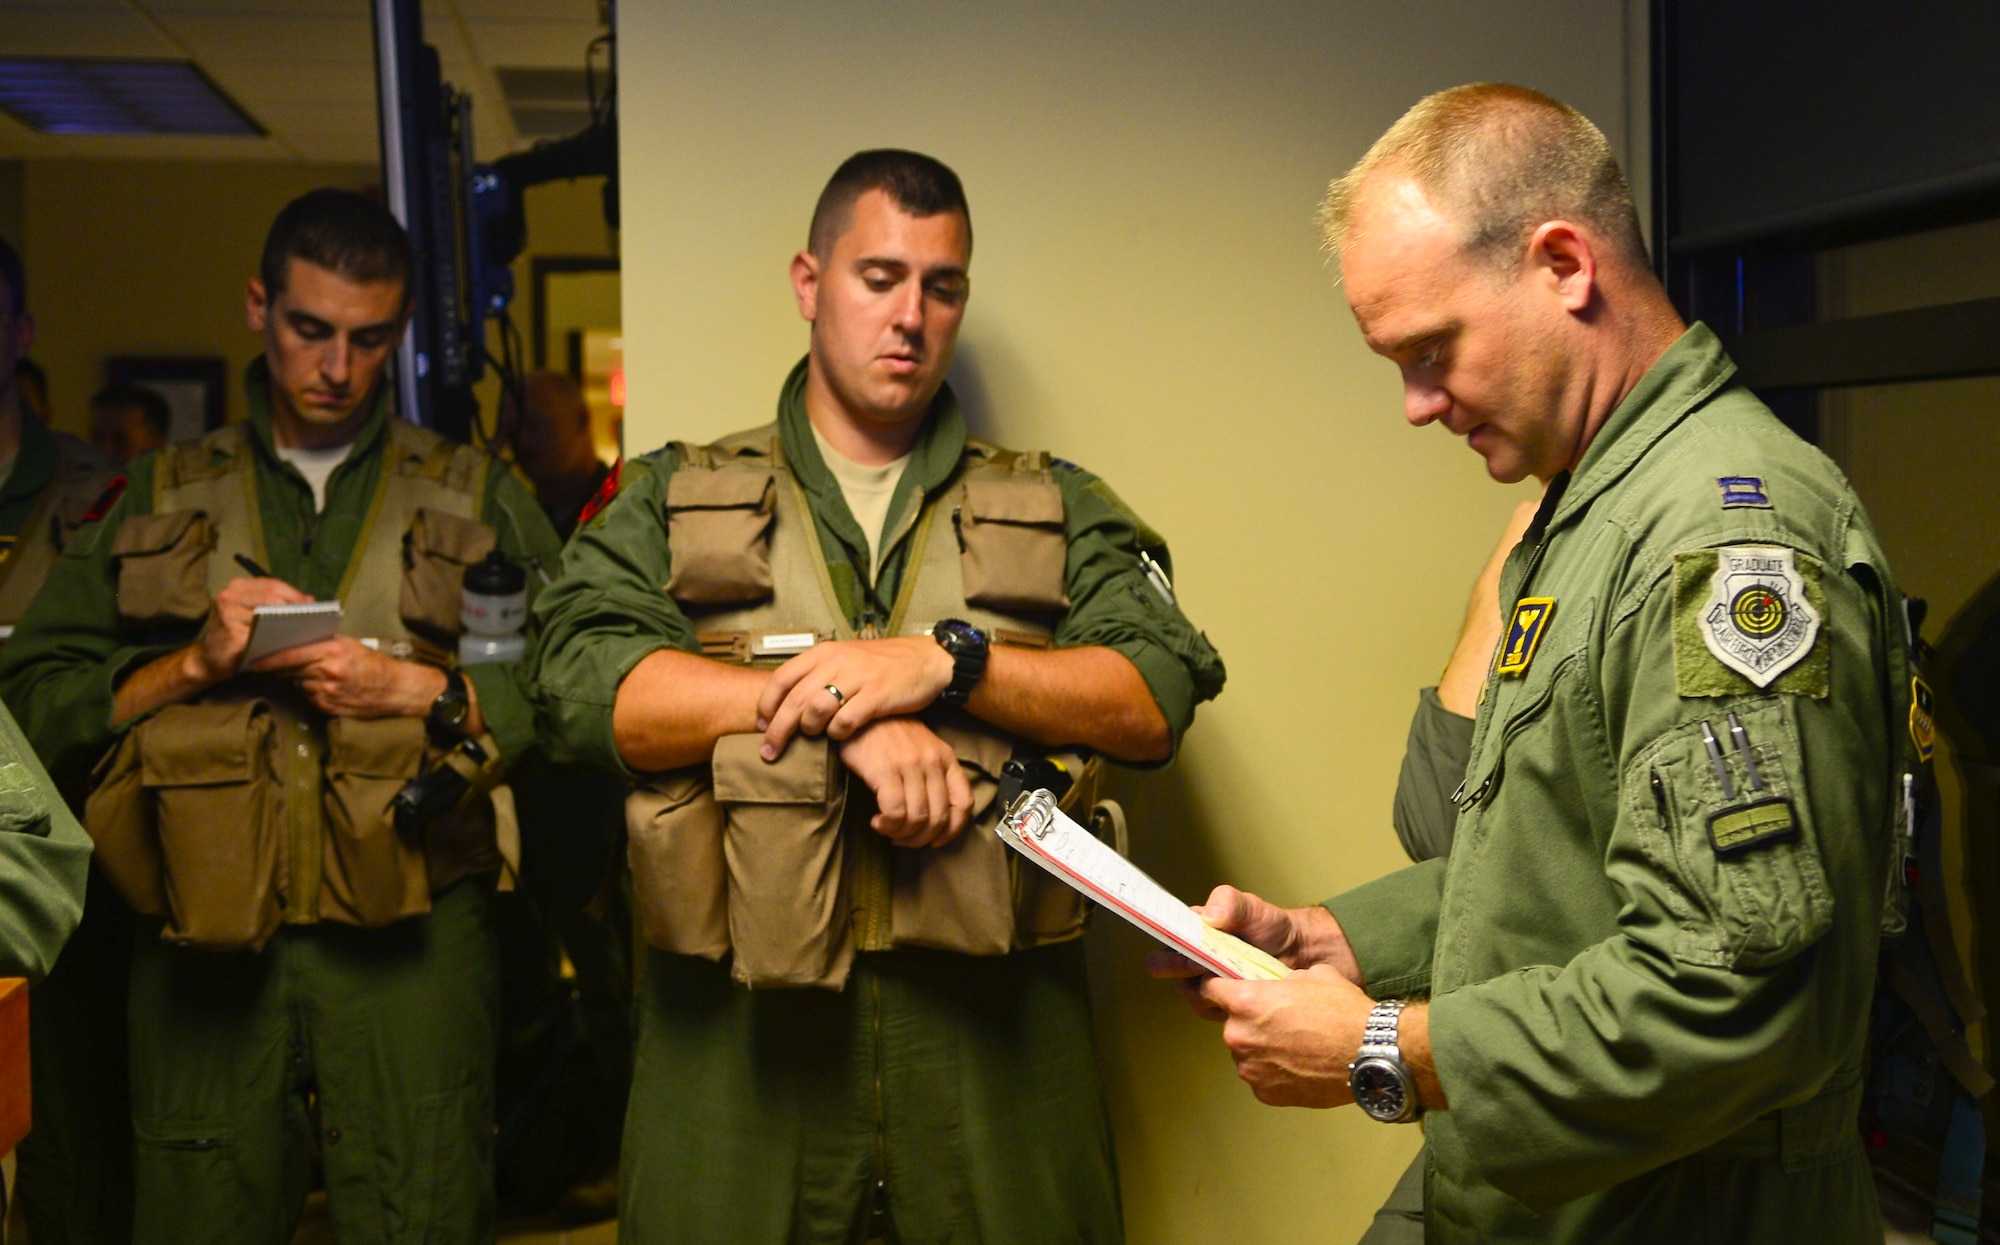 Capt. Eric Bow (right), the 2nd Operations Support Squadron Conventional Plans Flight commander, conducts a premission briefing with aircrew members at Barksdale Air Force Base, La., June 30, 2015. During the mission, two B-52H Stratofortresses flew round-trip to Australia, where they integrated with Royal Australian Air Force ground forces to conduct an inert conventional weapons exercise on the Delamere Air Weapons Range and performed a low approach at RAAF Base Tindal, Australia. (U.S. Air Force photo/Senior Airman Benjamin Raughton)